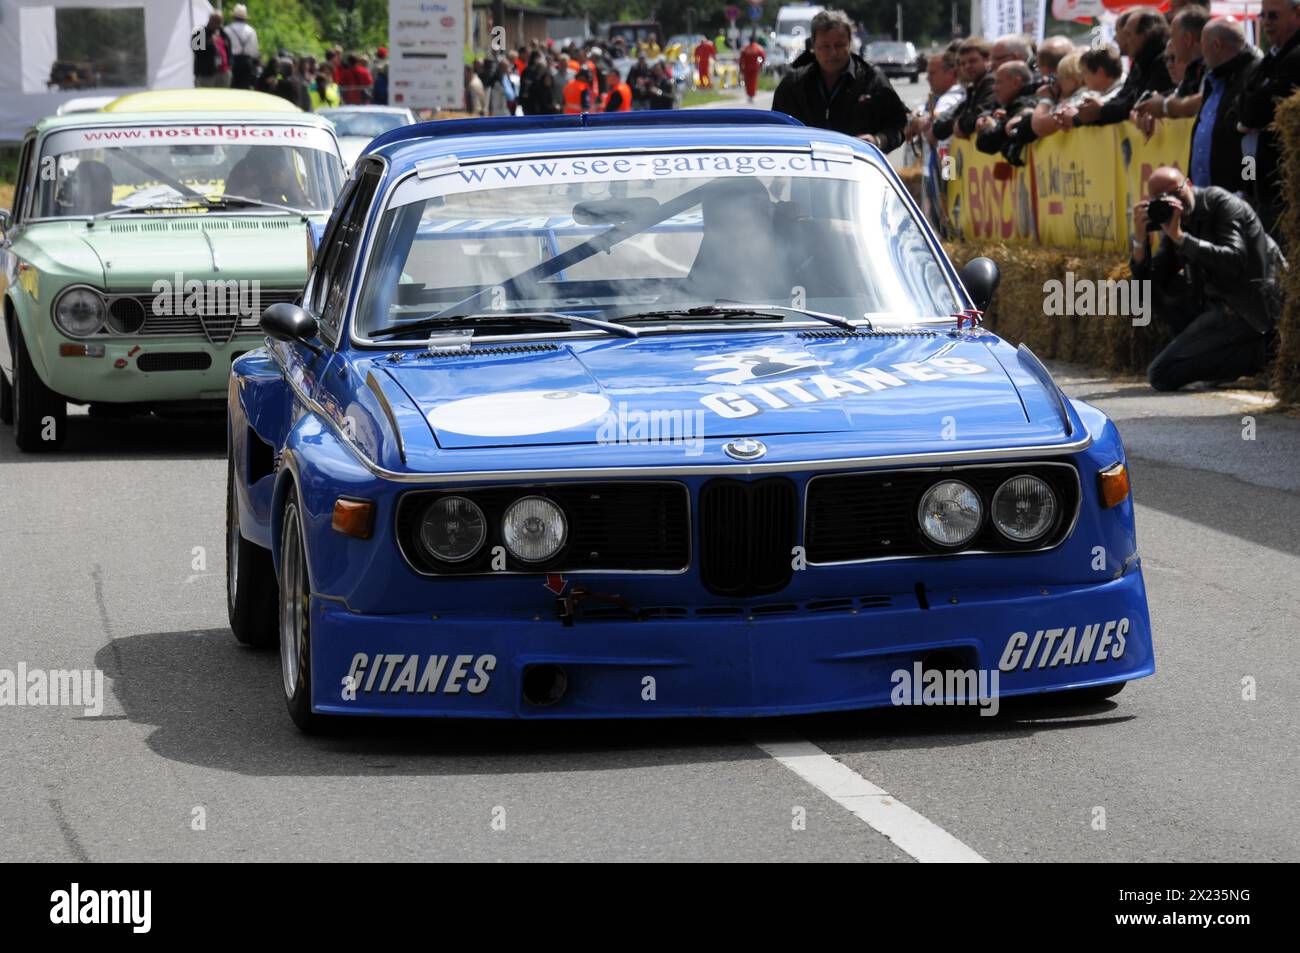 A blue BMW racing car with Gitanes branding at a road race, surrounded by spectators, SOLITUDE REVIVAL 2011, Stuttgart, Baden-Wuerttemberg, Germany Stock Photo